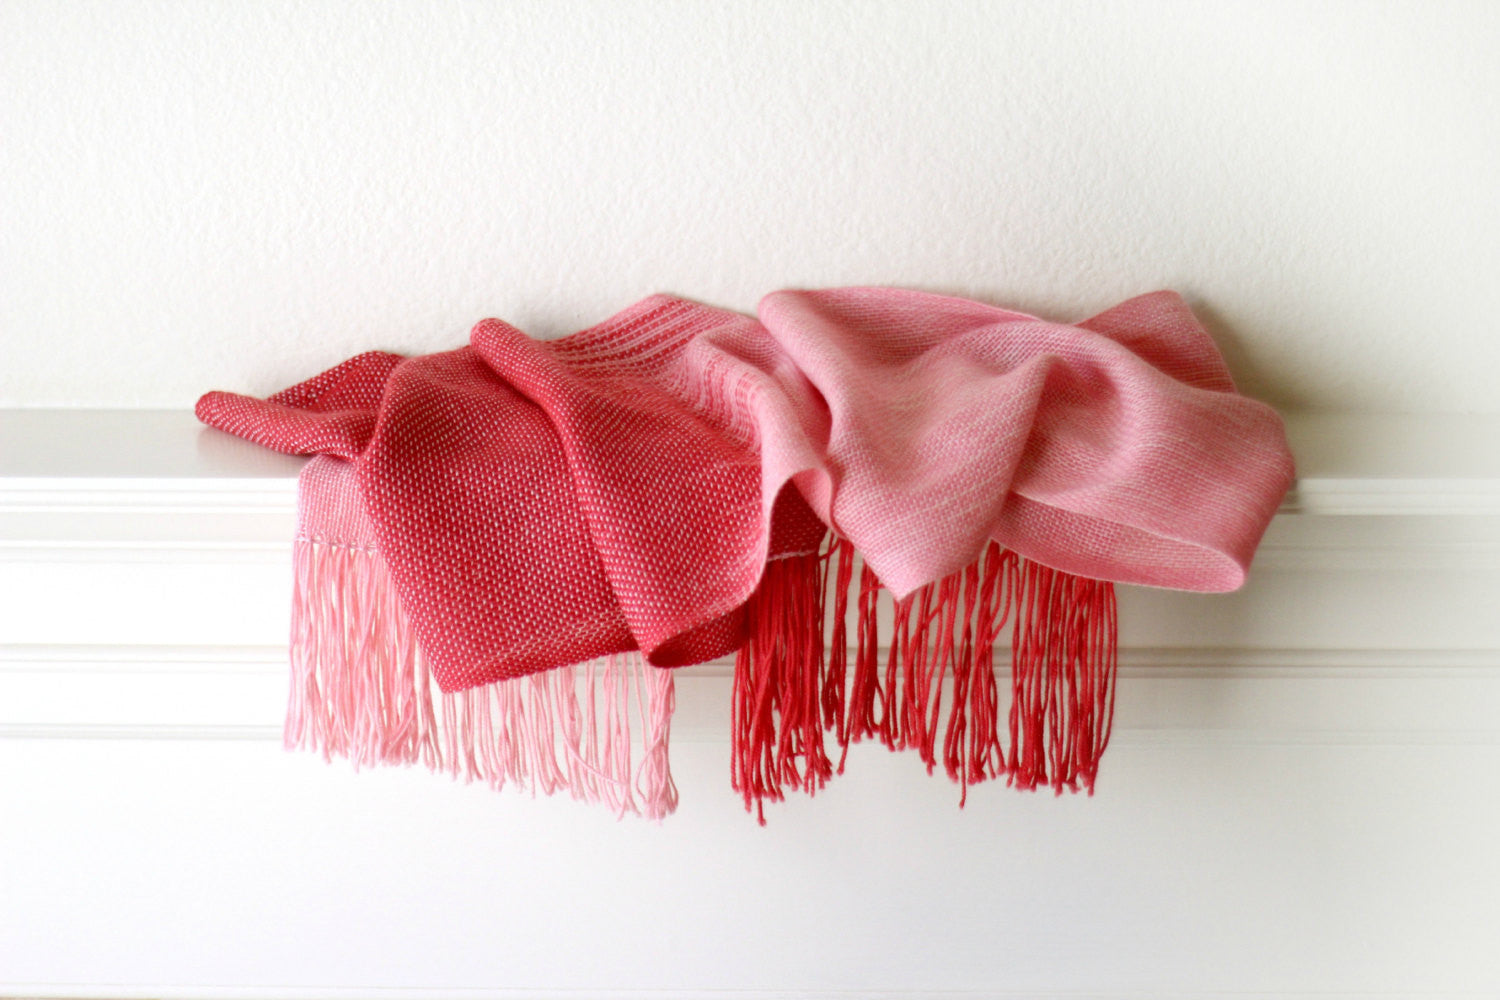 Hand woven scarf in red and pink shades